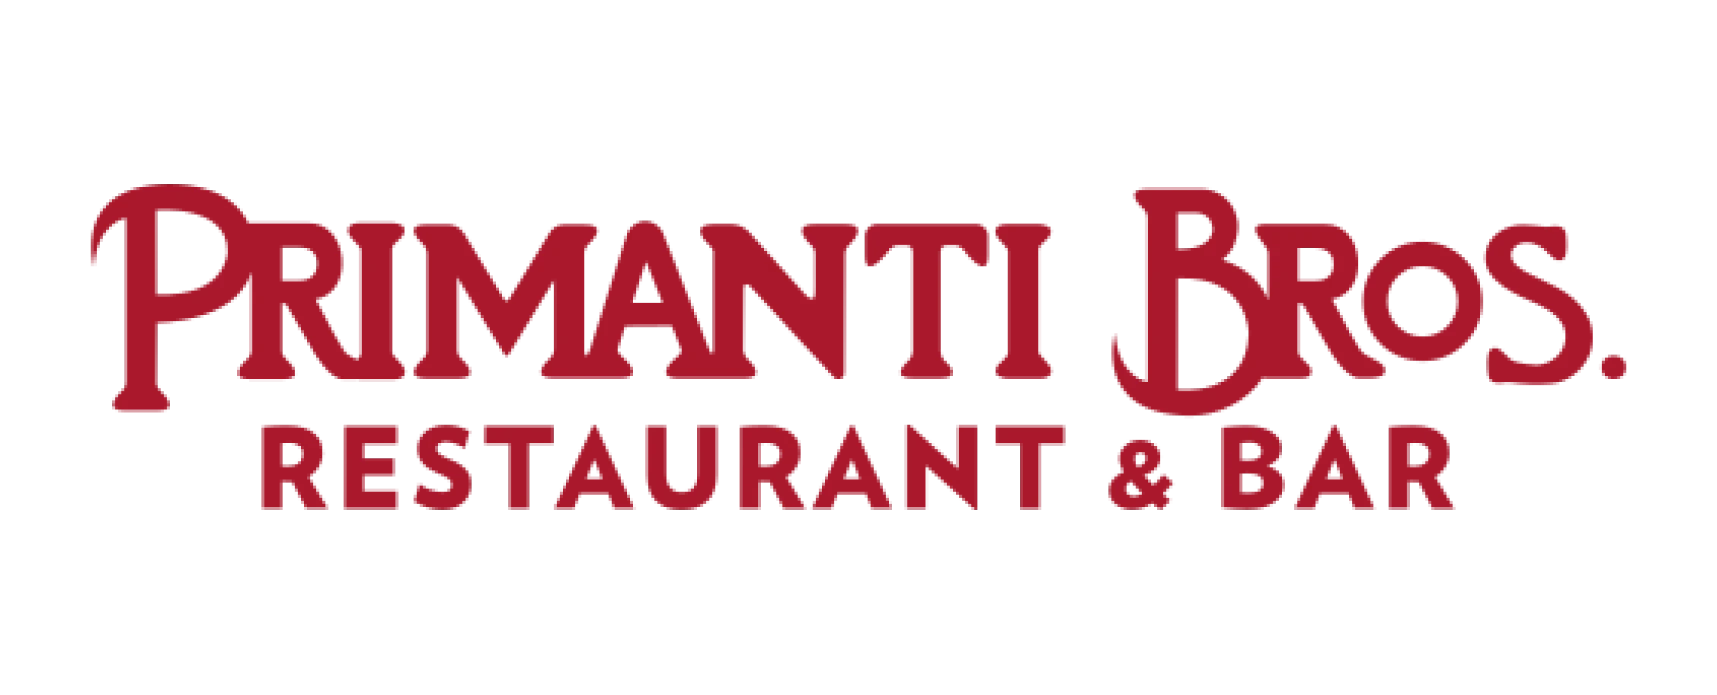 Primanti Brothers Restaurant and Bar Logo